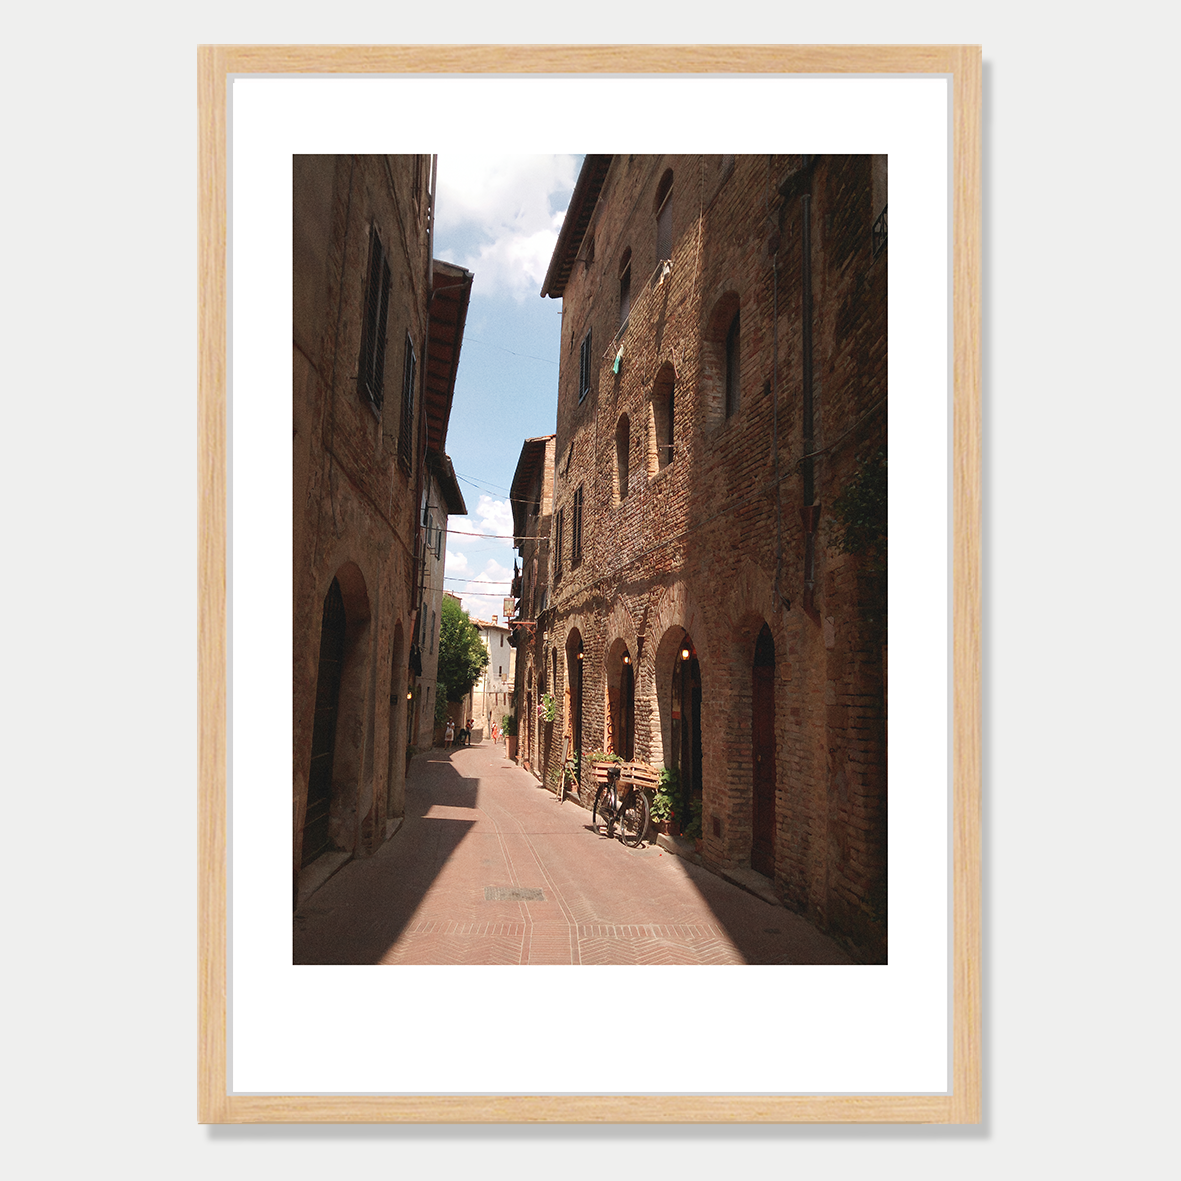 A Bicycle and Still Life in a Backstreet of San Gimignano, Naples, Italy, Photographic Art Print in a Skinny Raw Frame